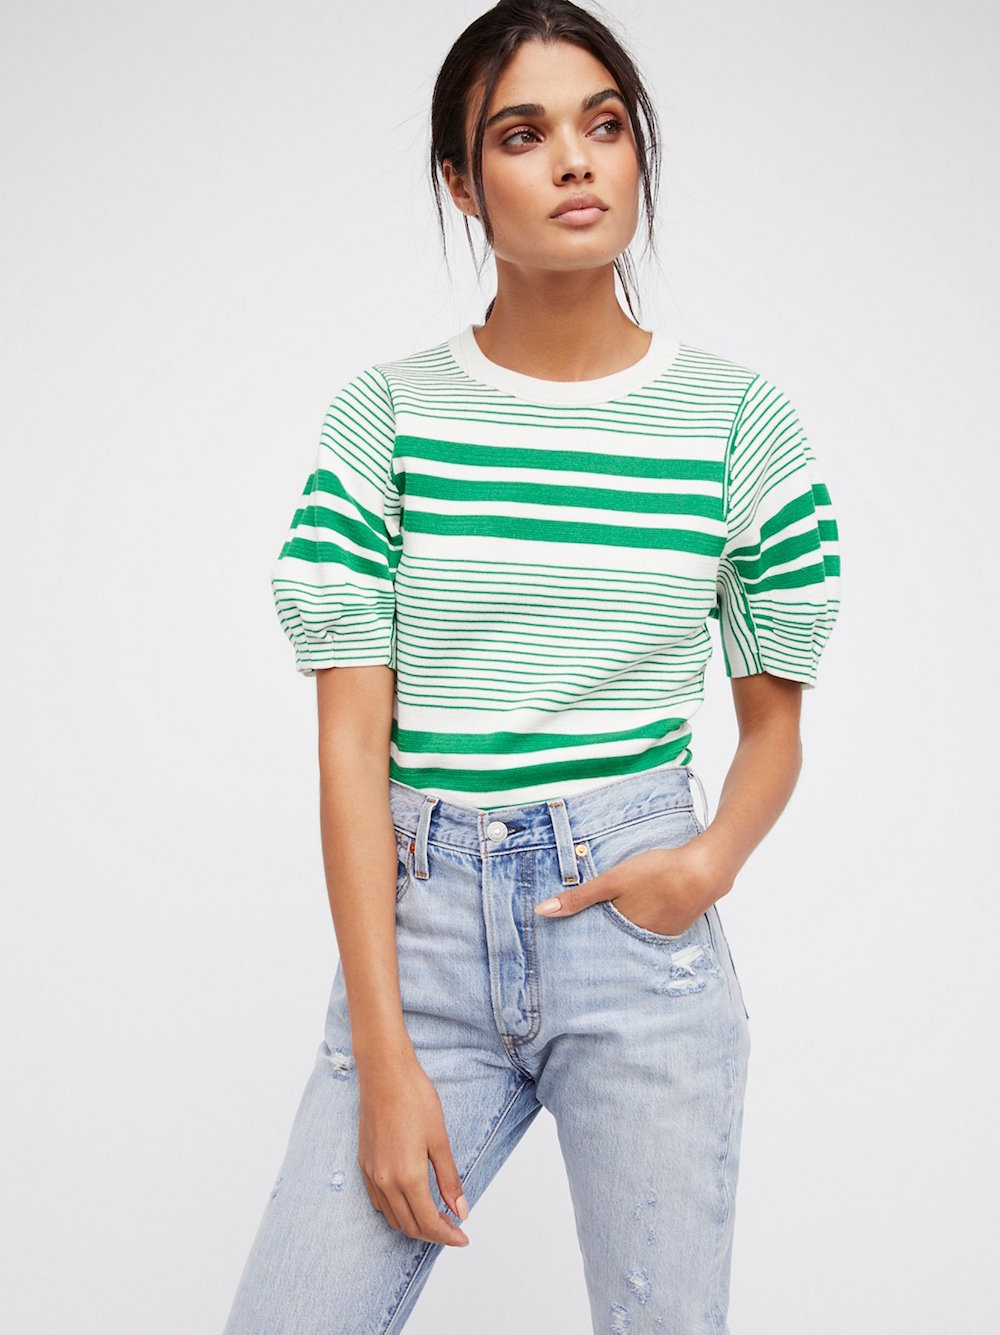 Fashion Trend: Stripes Are Strong for Spring 2017 - theFashionSpot